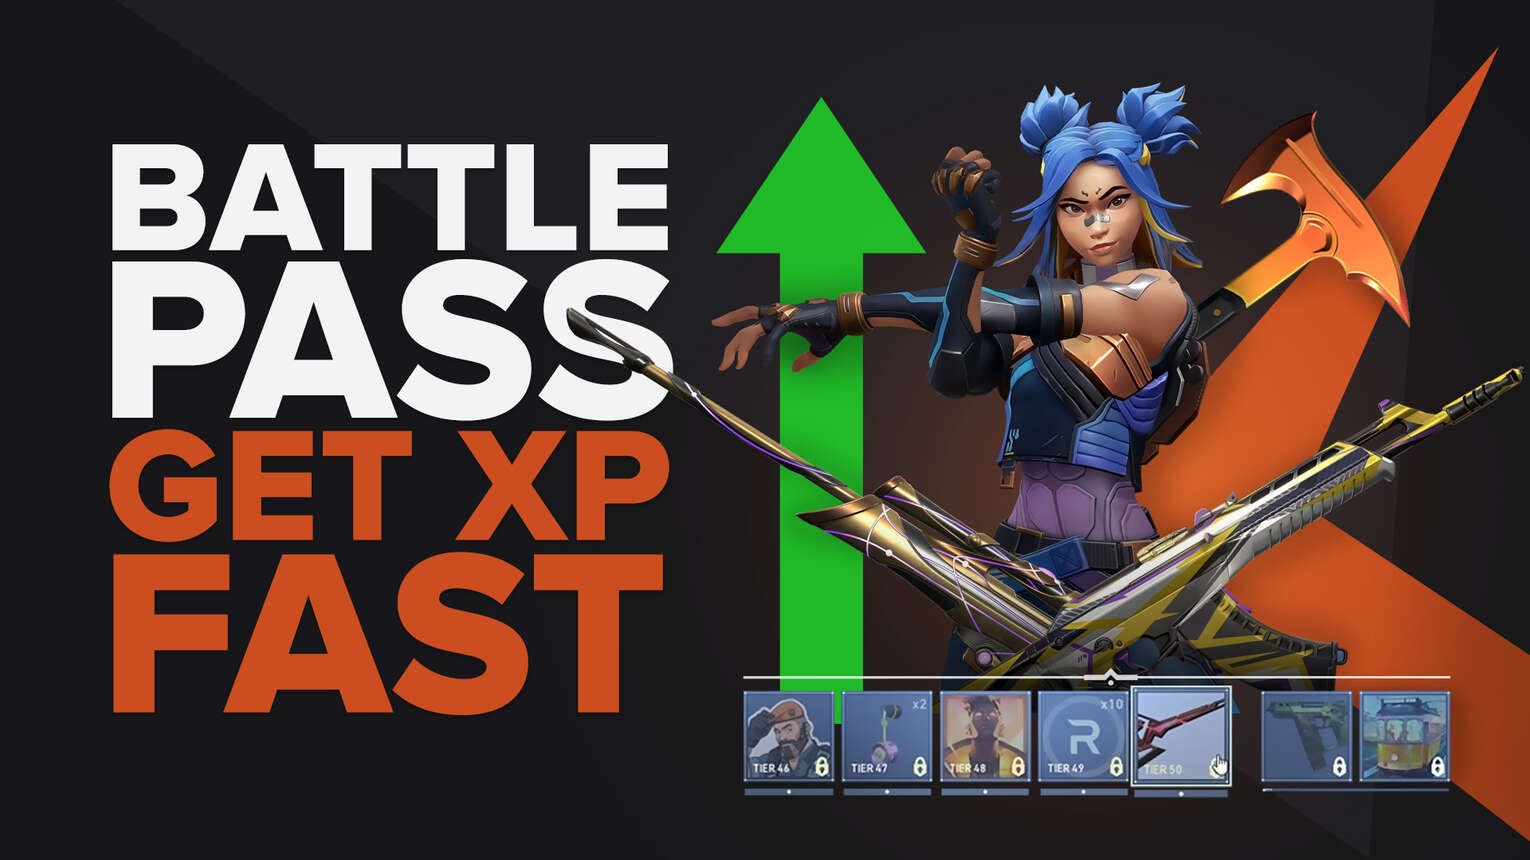 How To Get More XP Fast in Valorant Battle Pass [4 Ways]